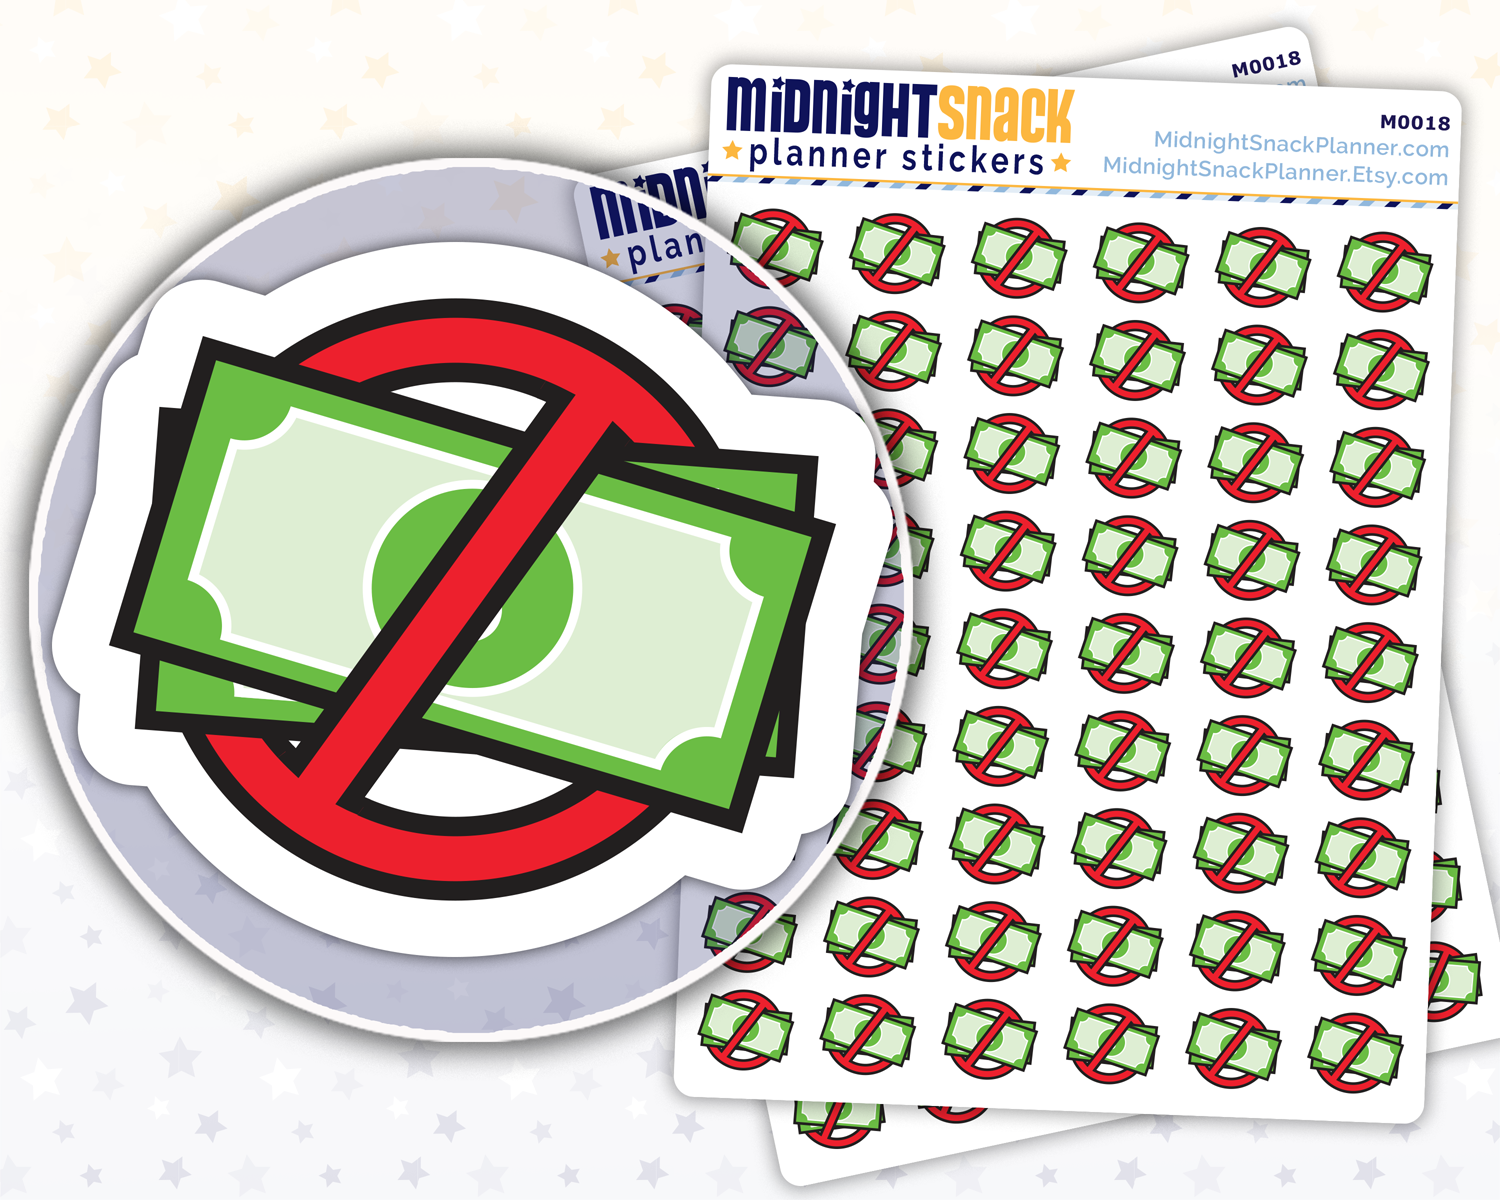 No Spend Icon: Budgeting and Finances Planner Stickers